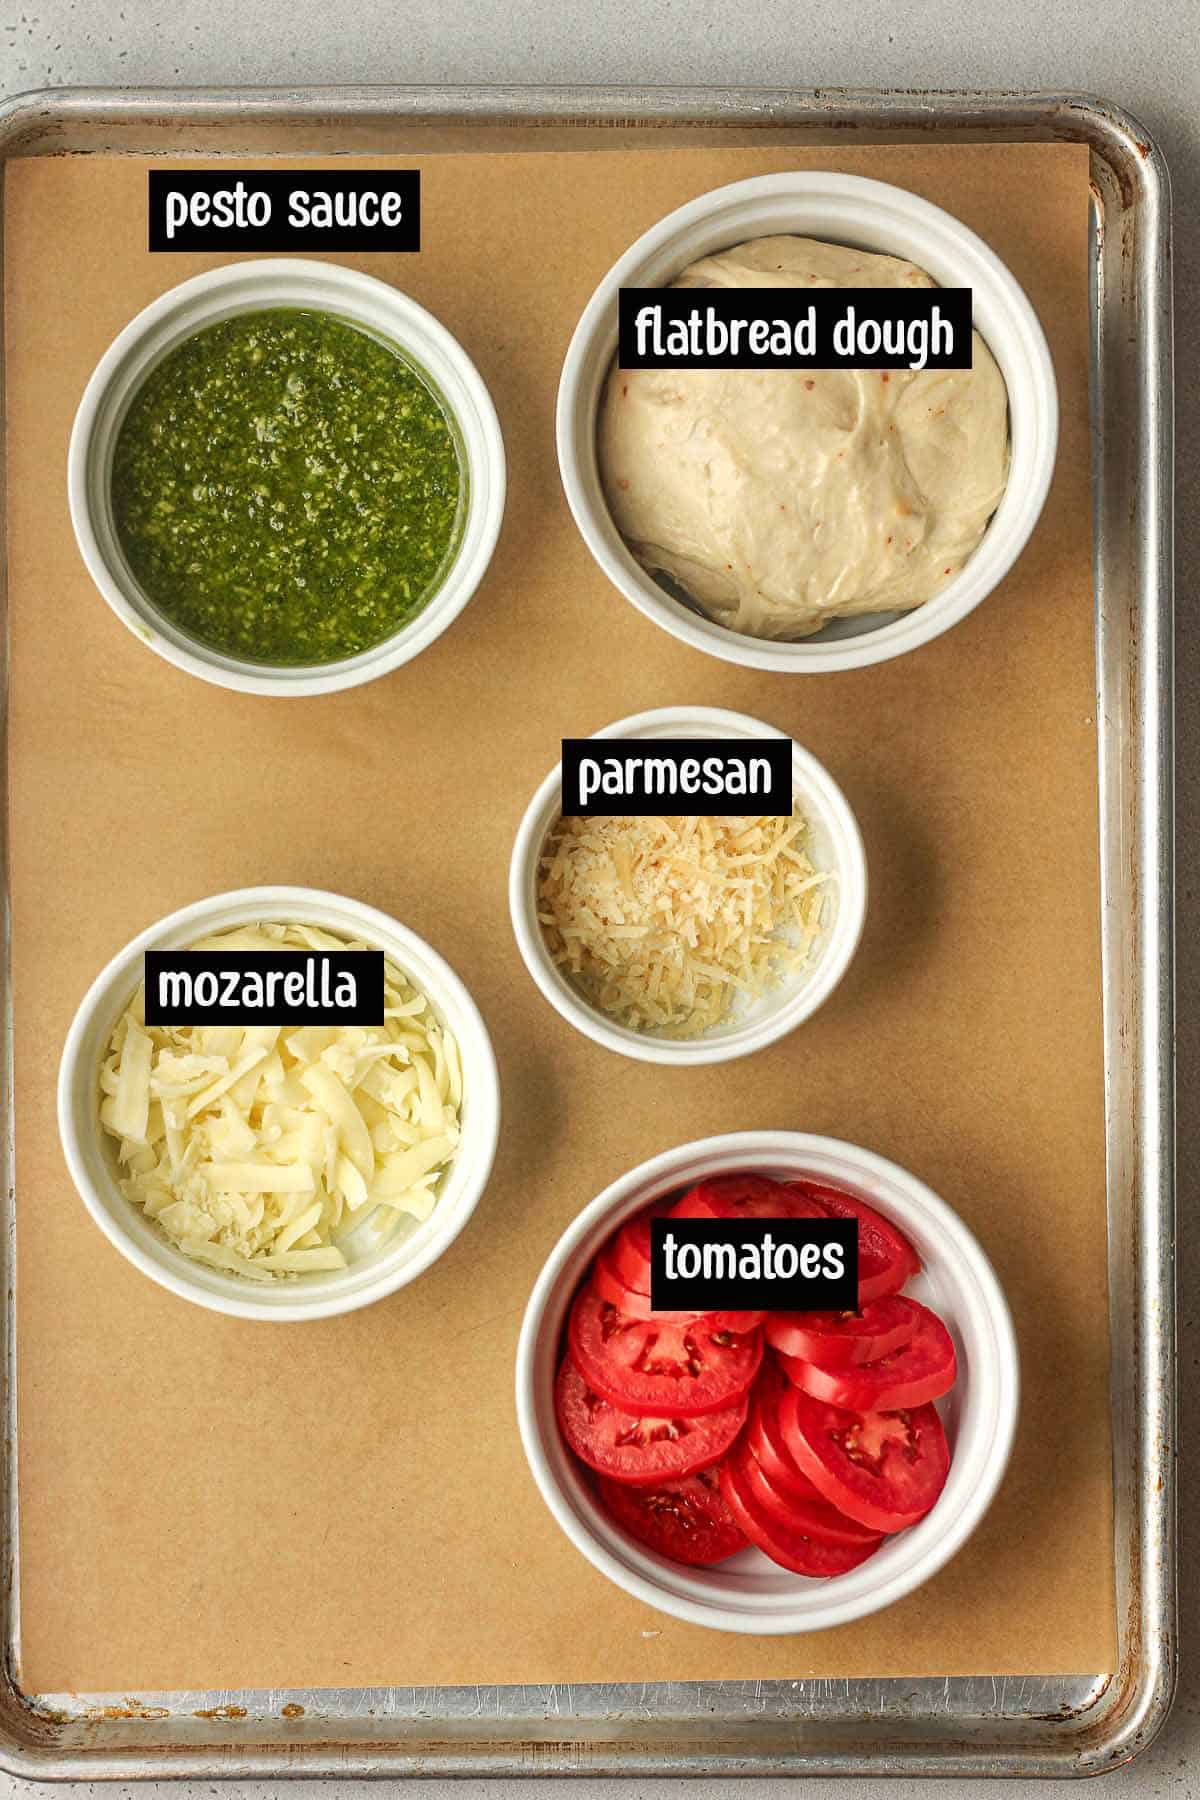 The ingredients for the flatbread pizza.